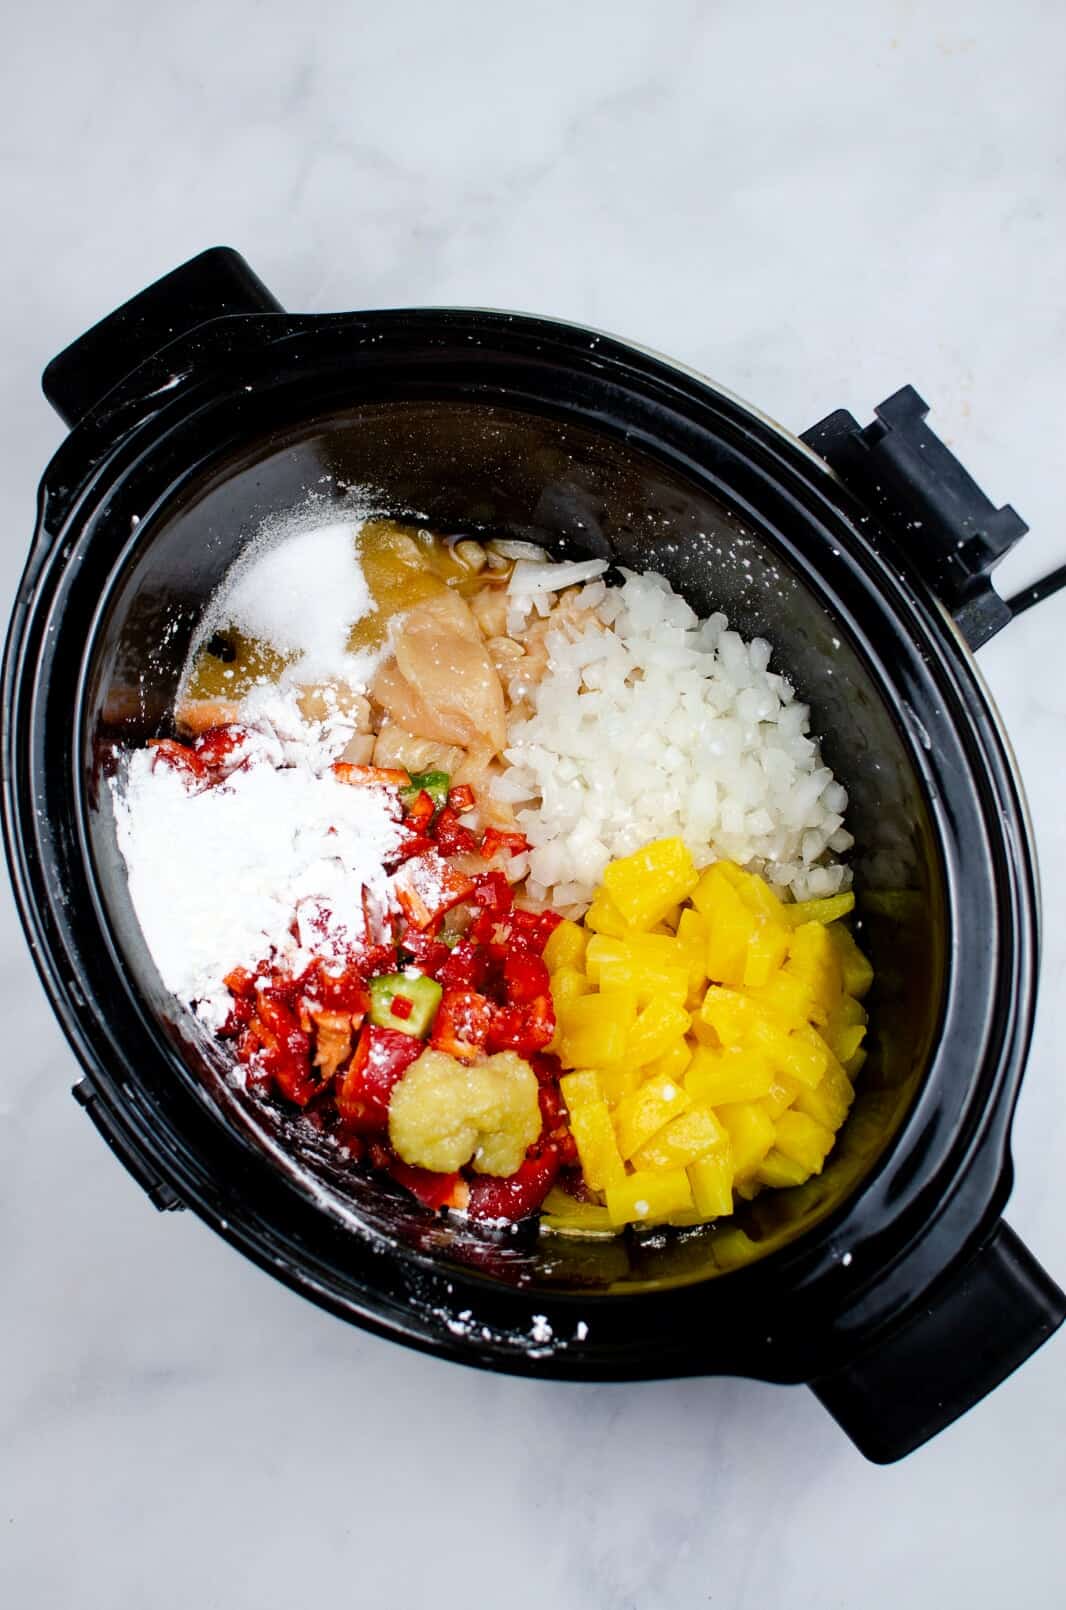 A slow cooker filled with ingredients to make sweet and sour chicken.